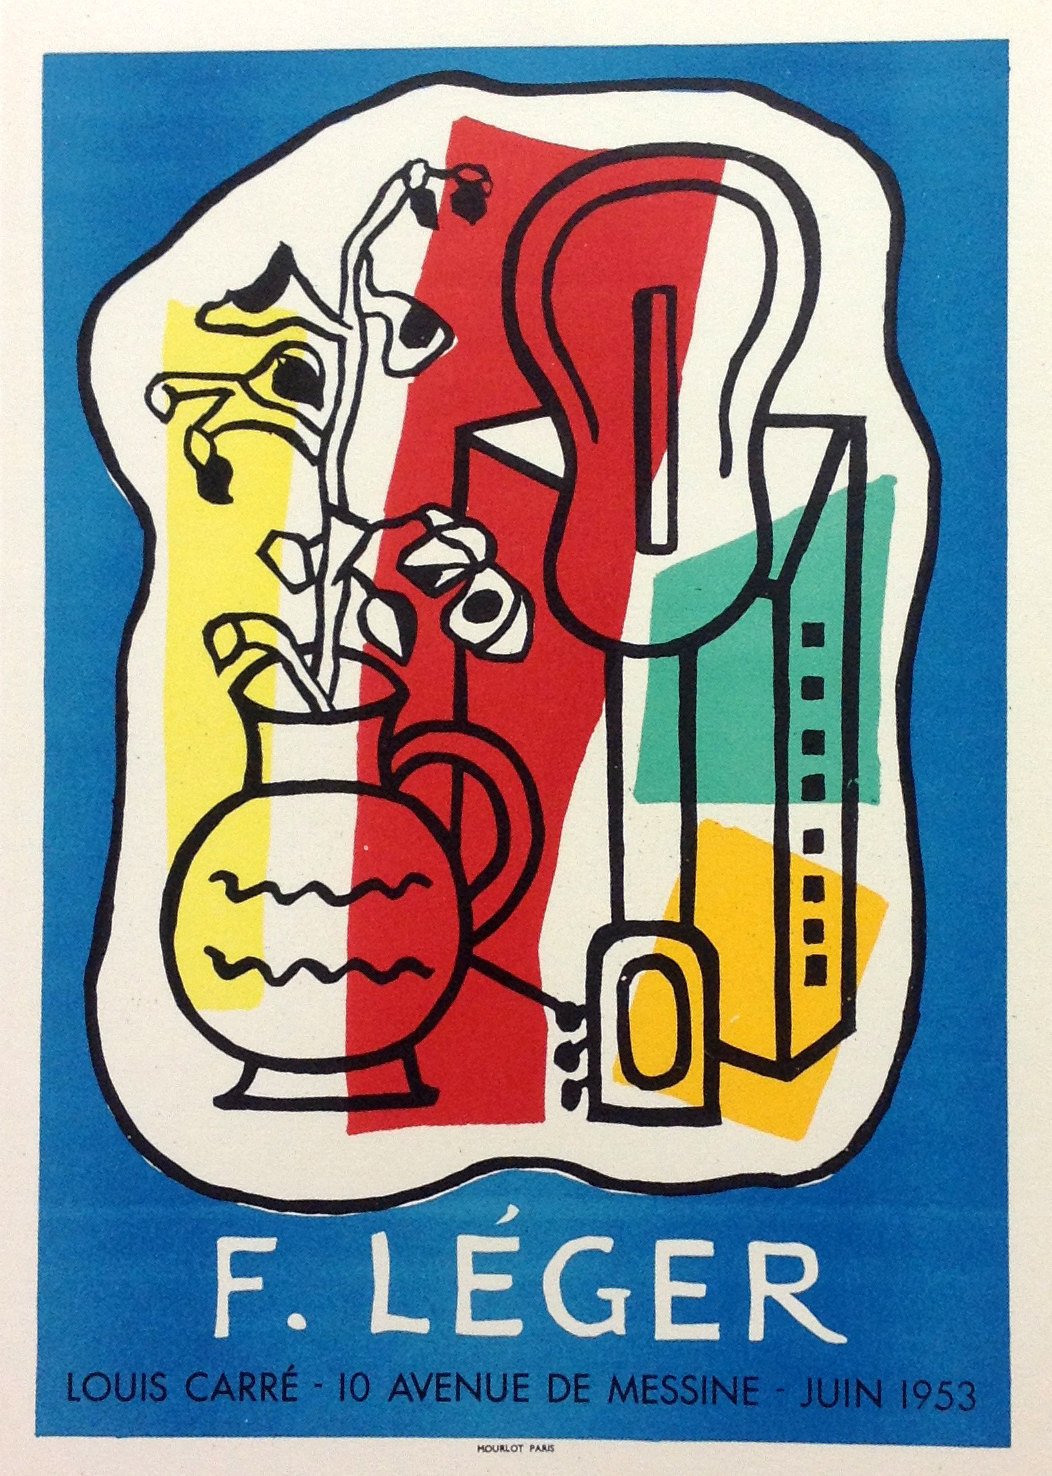 Leger 34, Lithograph Expo 1953, Art in posters